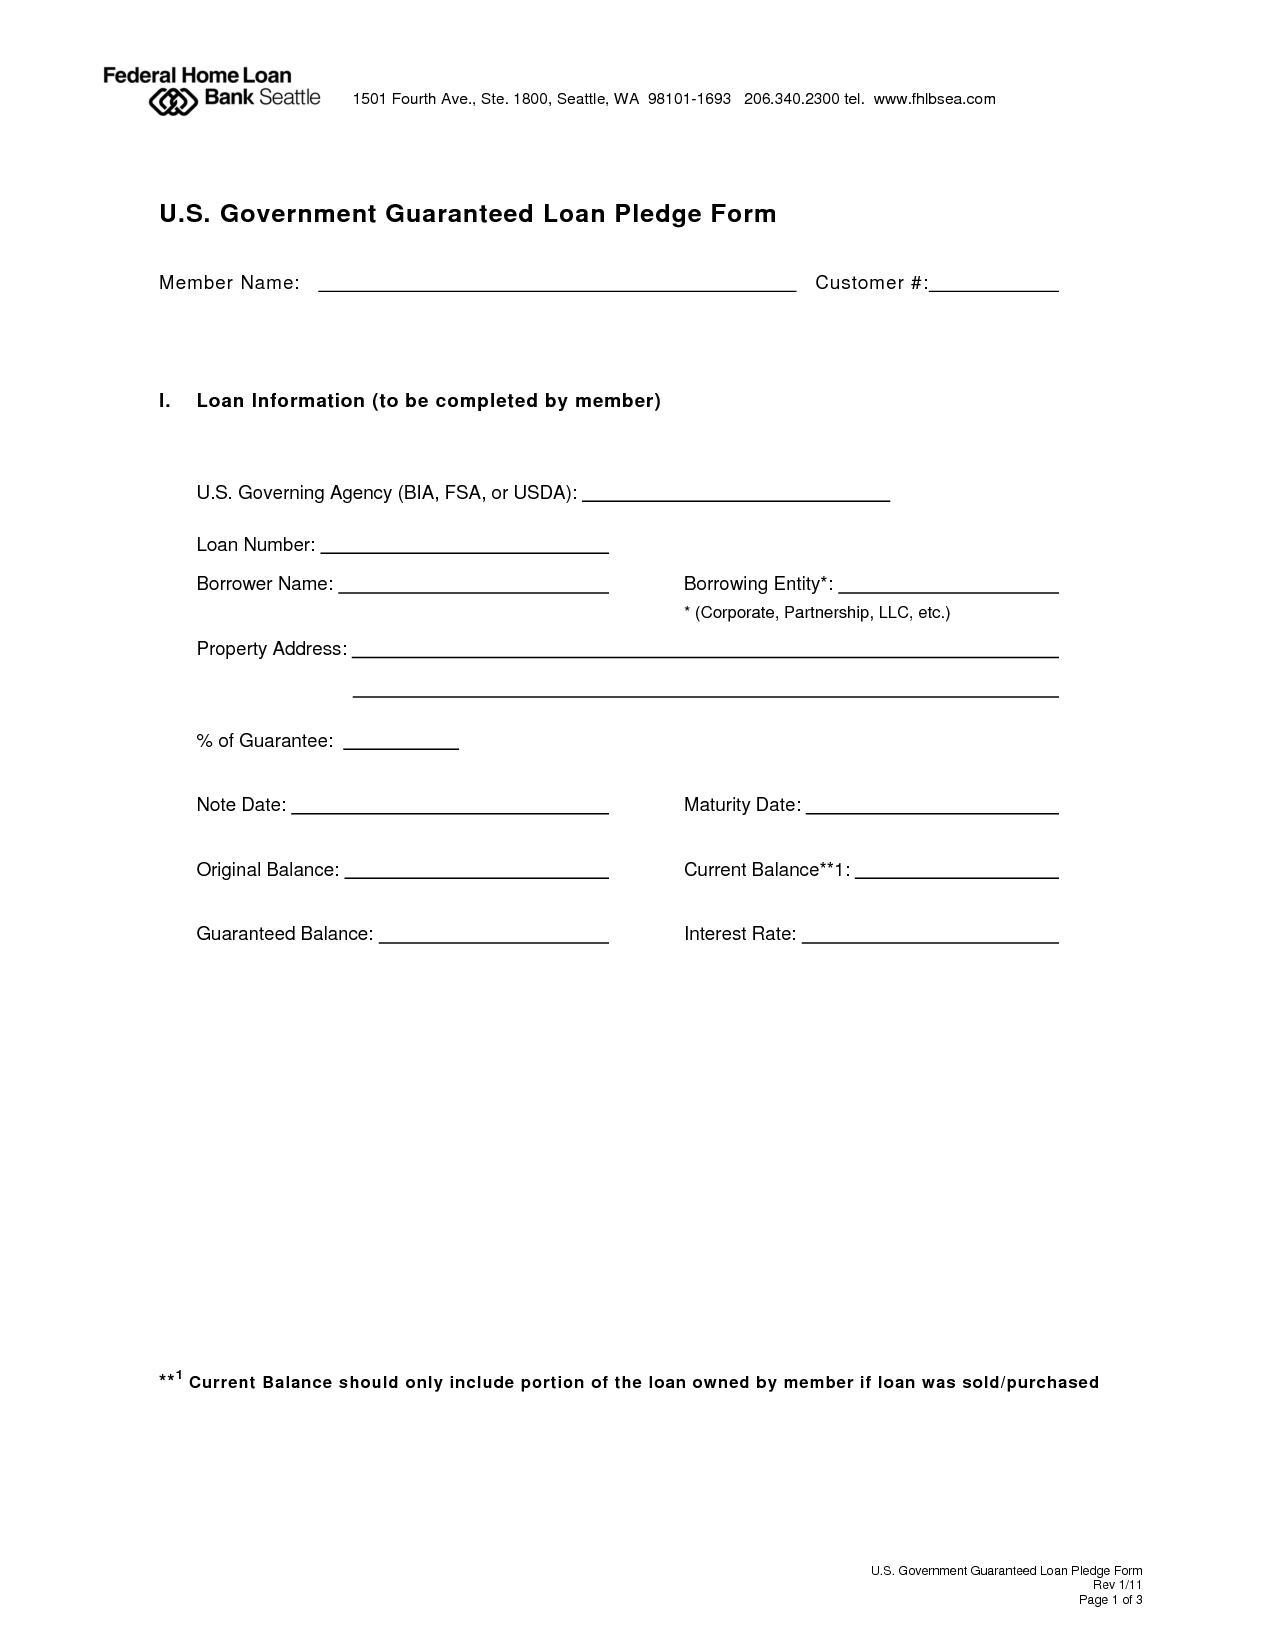 Cash Loan Agreement - Free Printable Documents